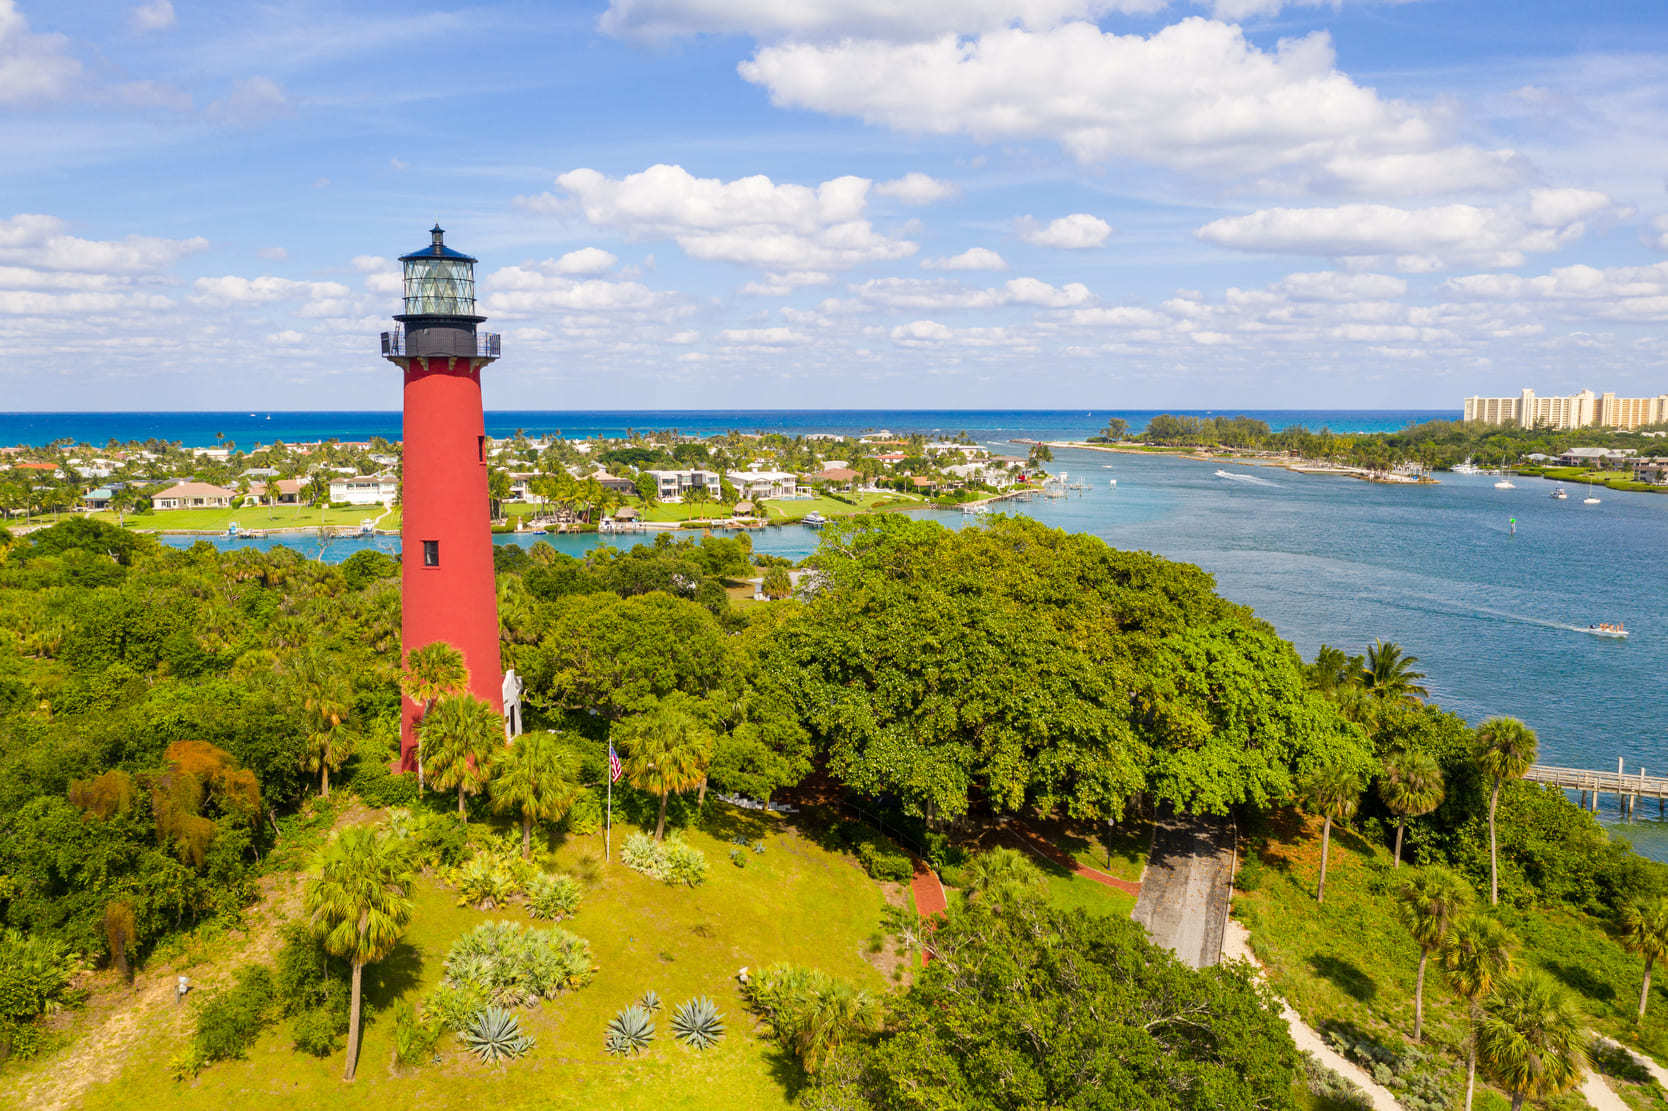 Jupiter Lighthouse in Jupiter, Florida with the Atlantic Ocean in the background